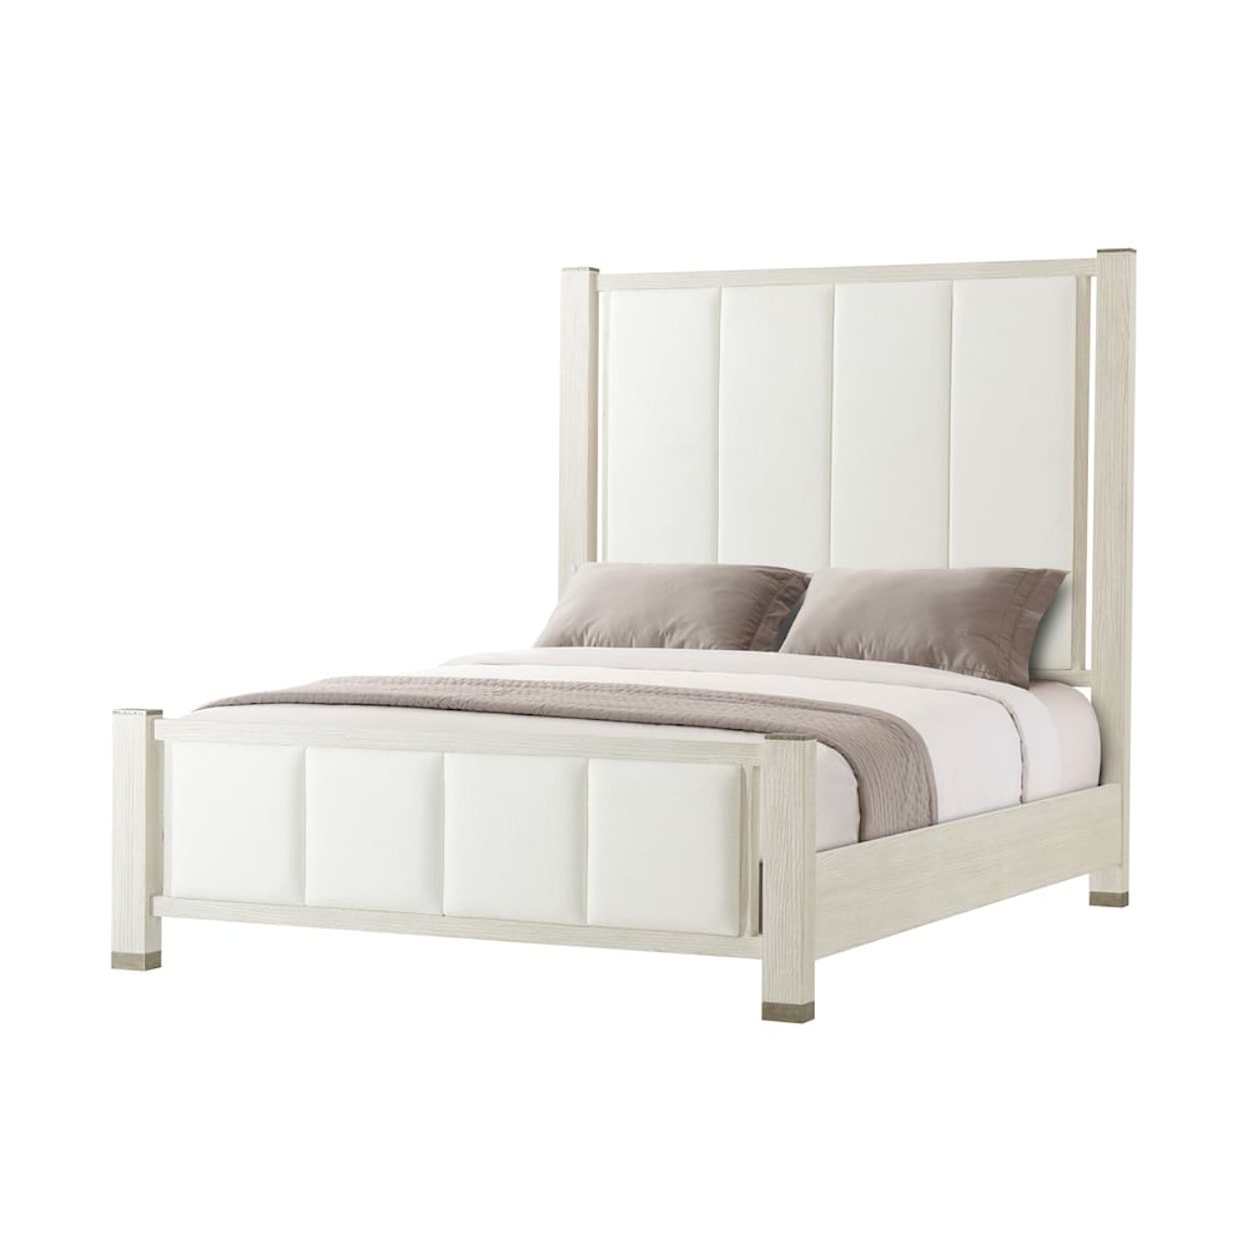 Theodore Alexander Breeze Upholstered California King Bed